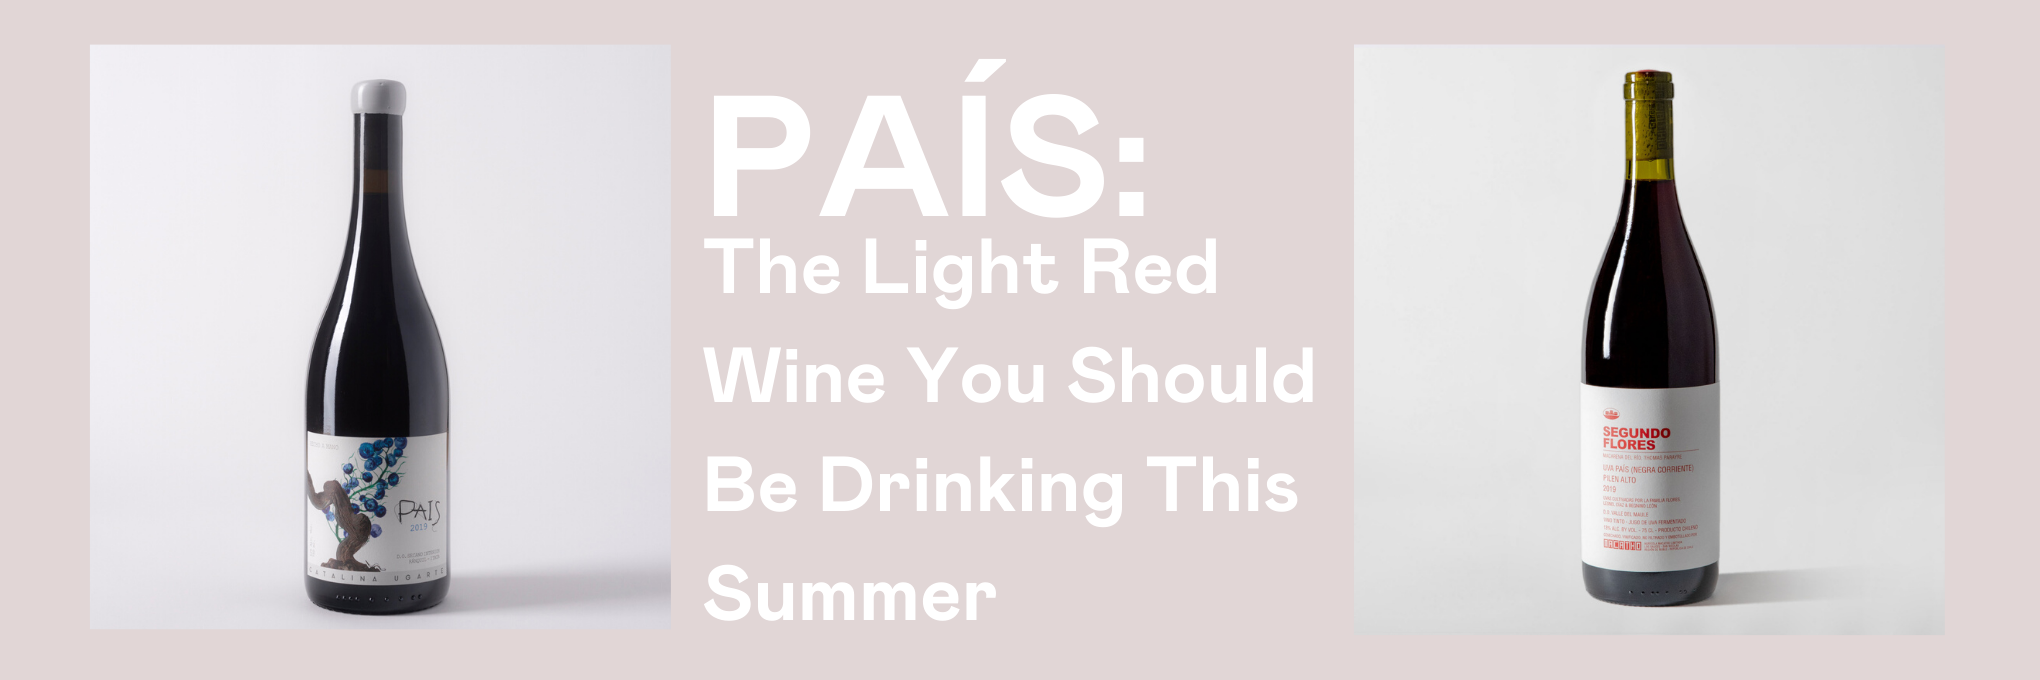 País: The Light Red Wine You Should Be Drinking This Summer